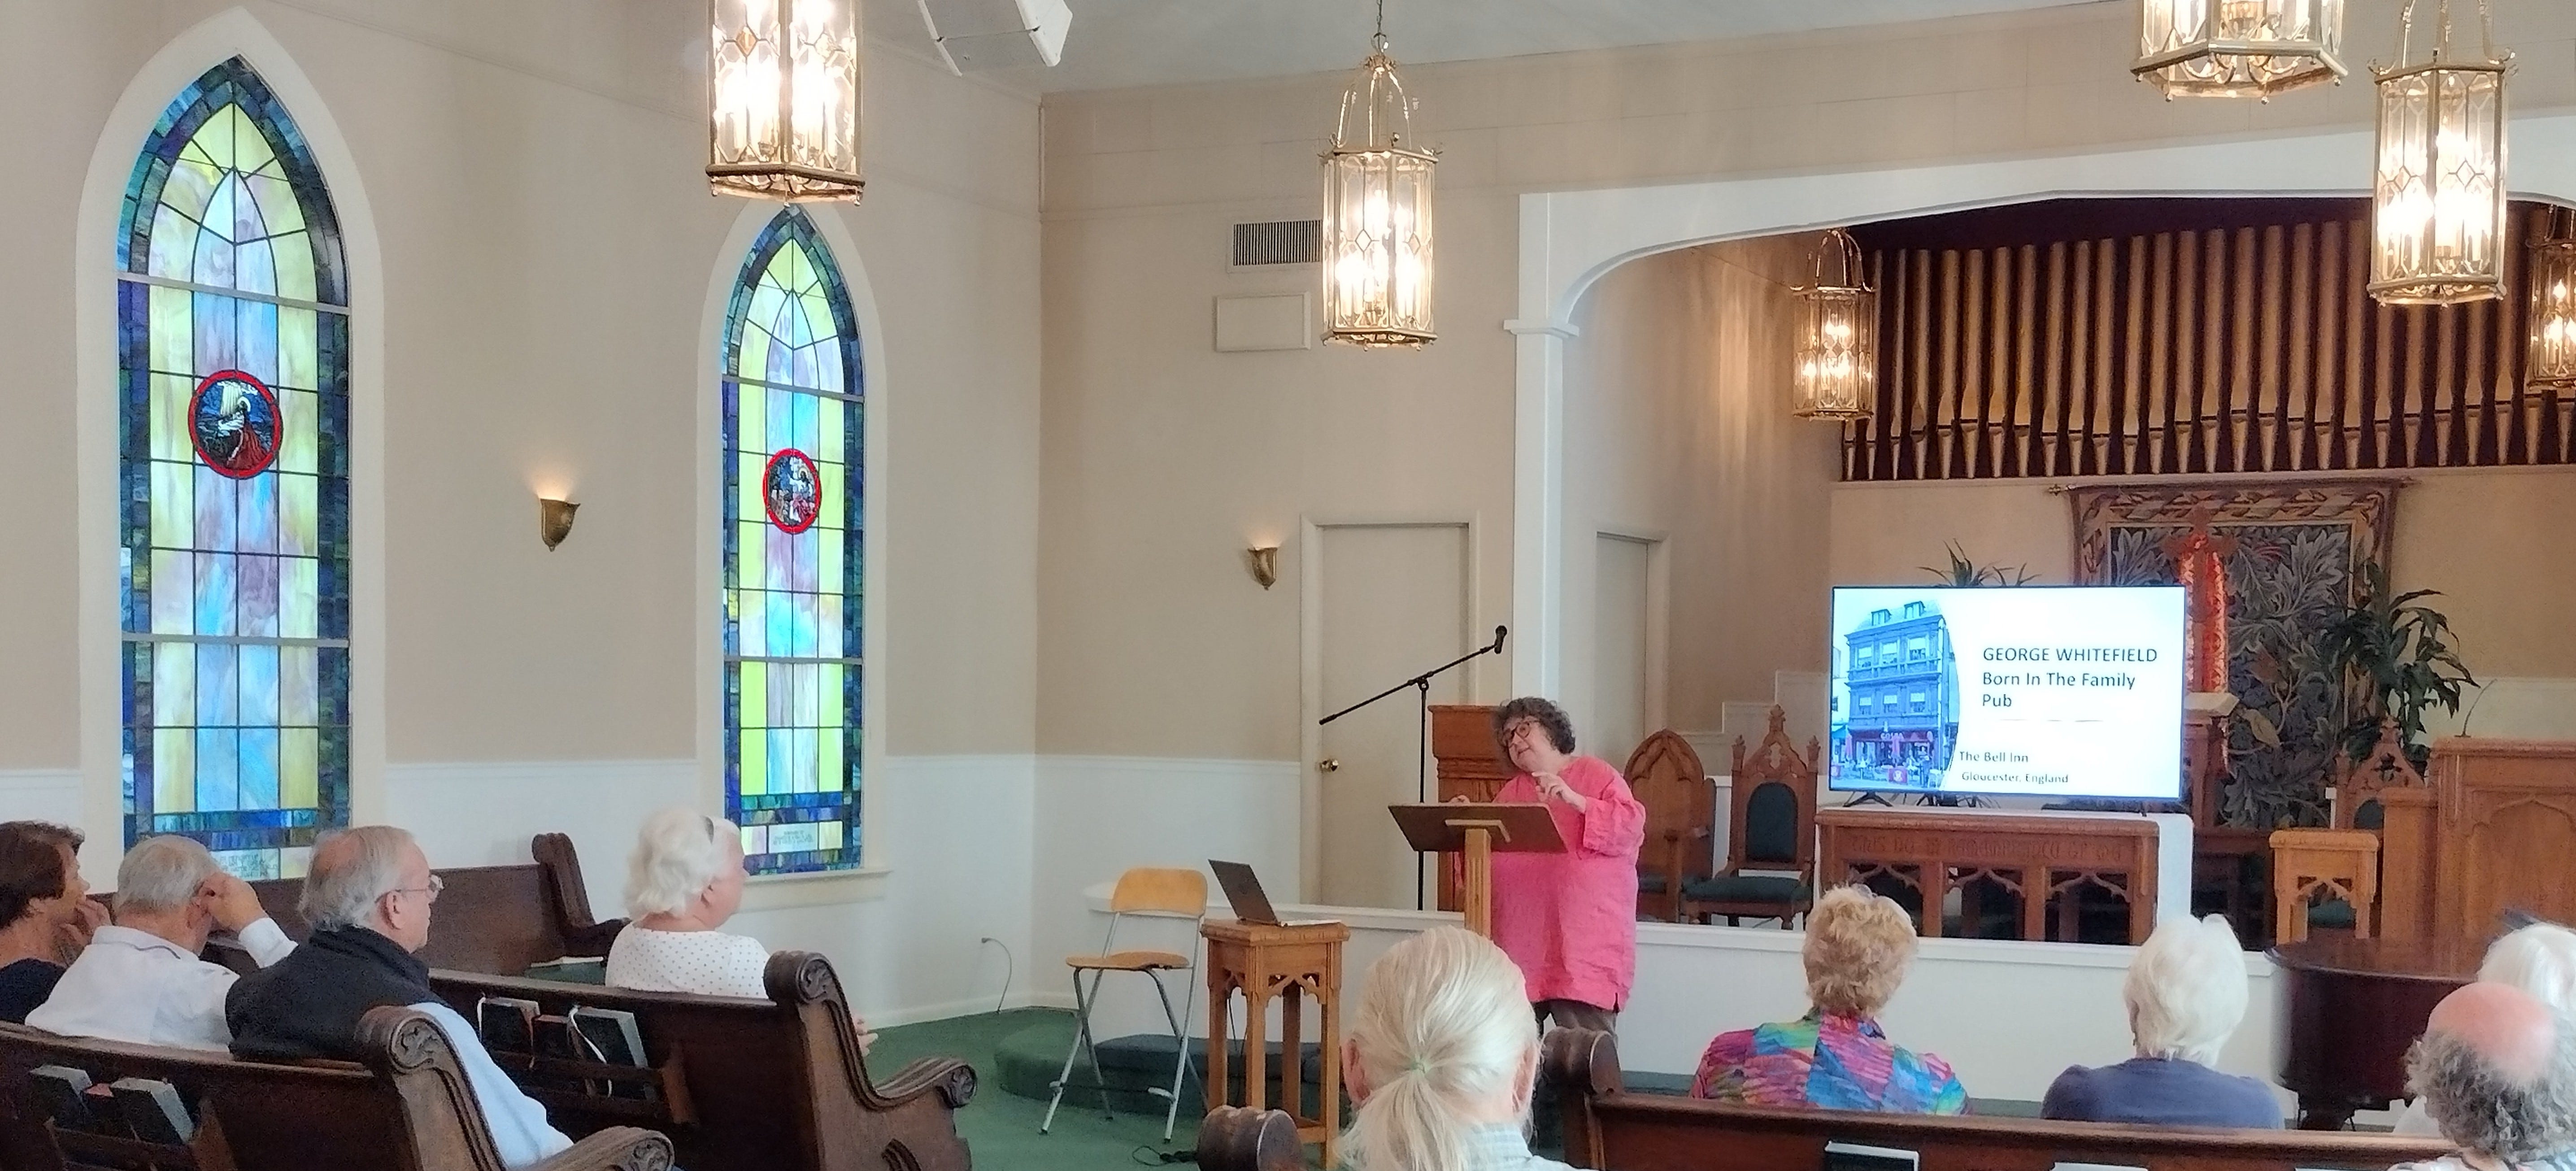 Annette at podium in church with stained glass and pews talking to audience